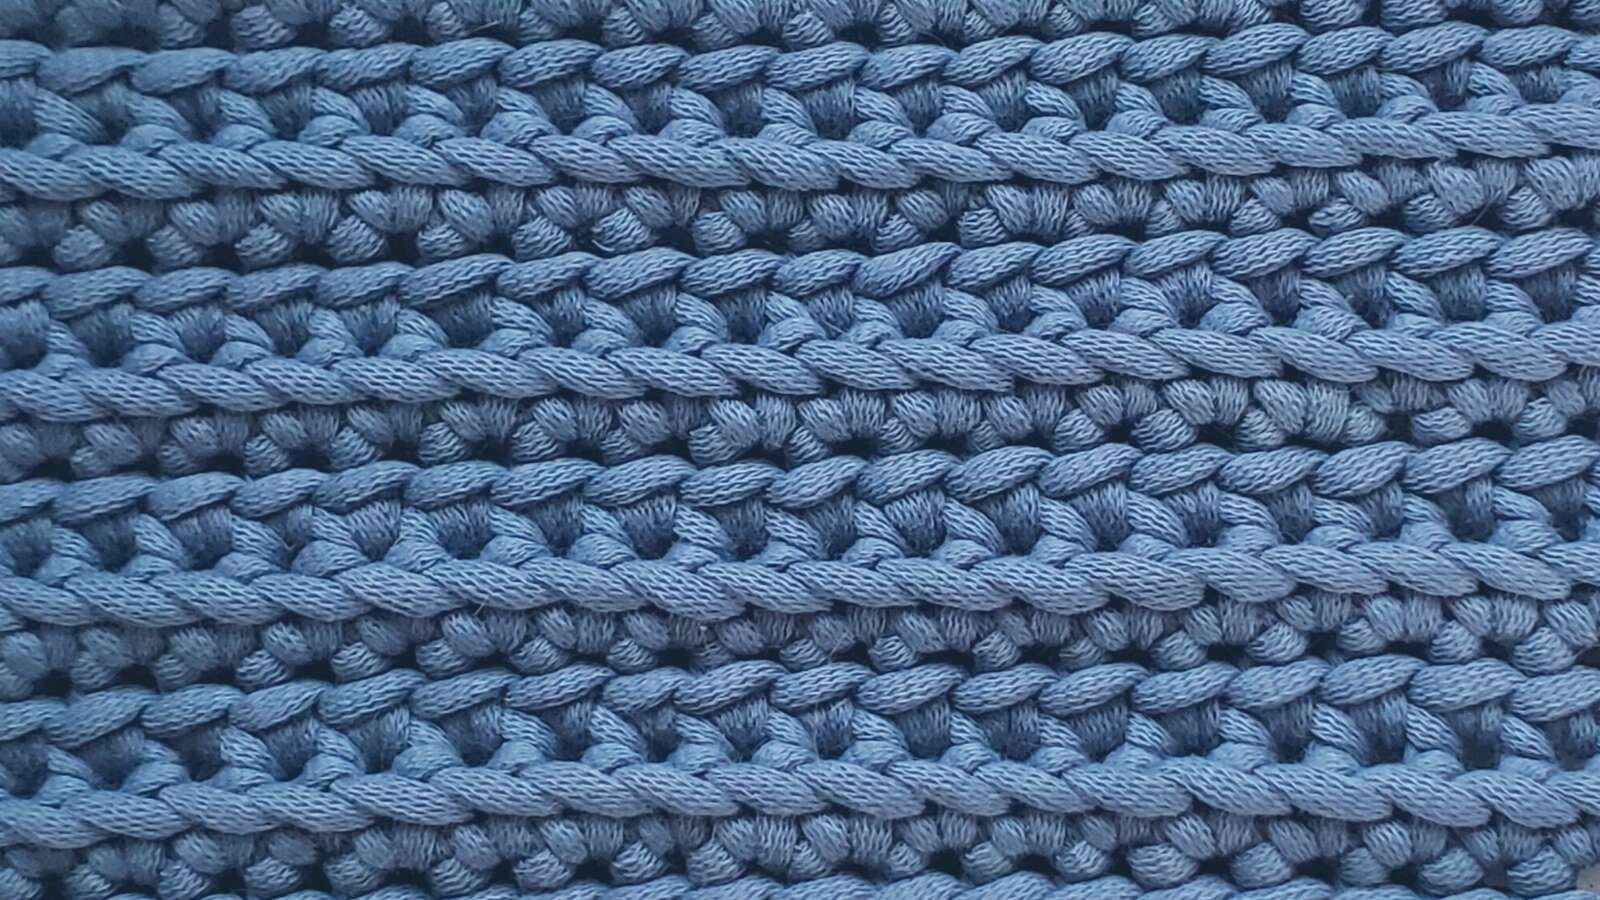 How To Do A Linked Half Double Crochet Stitch